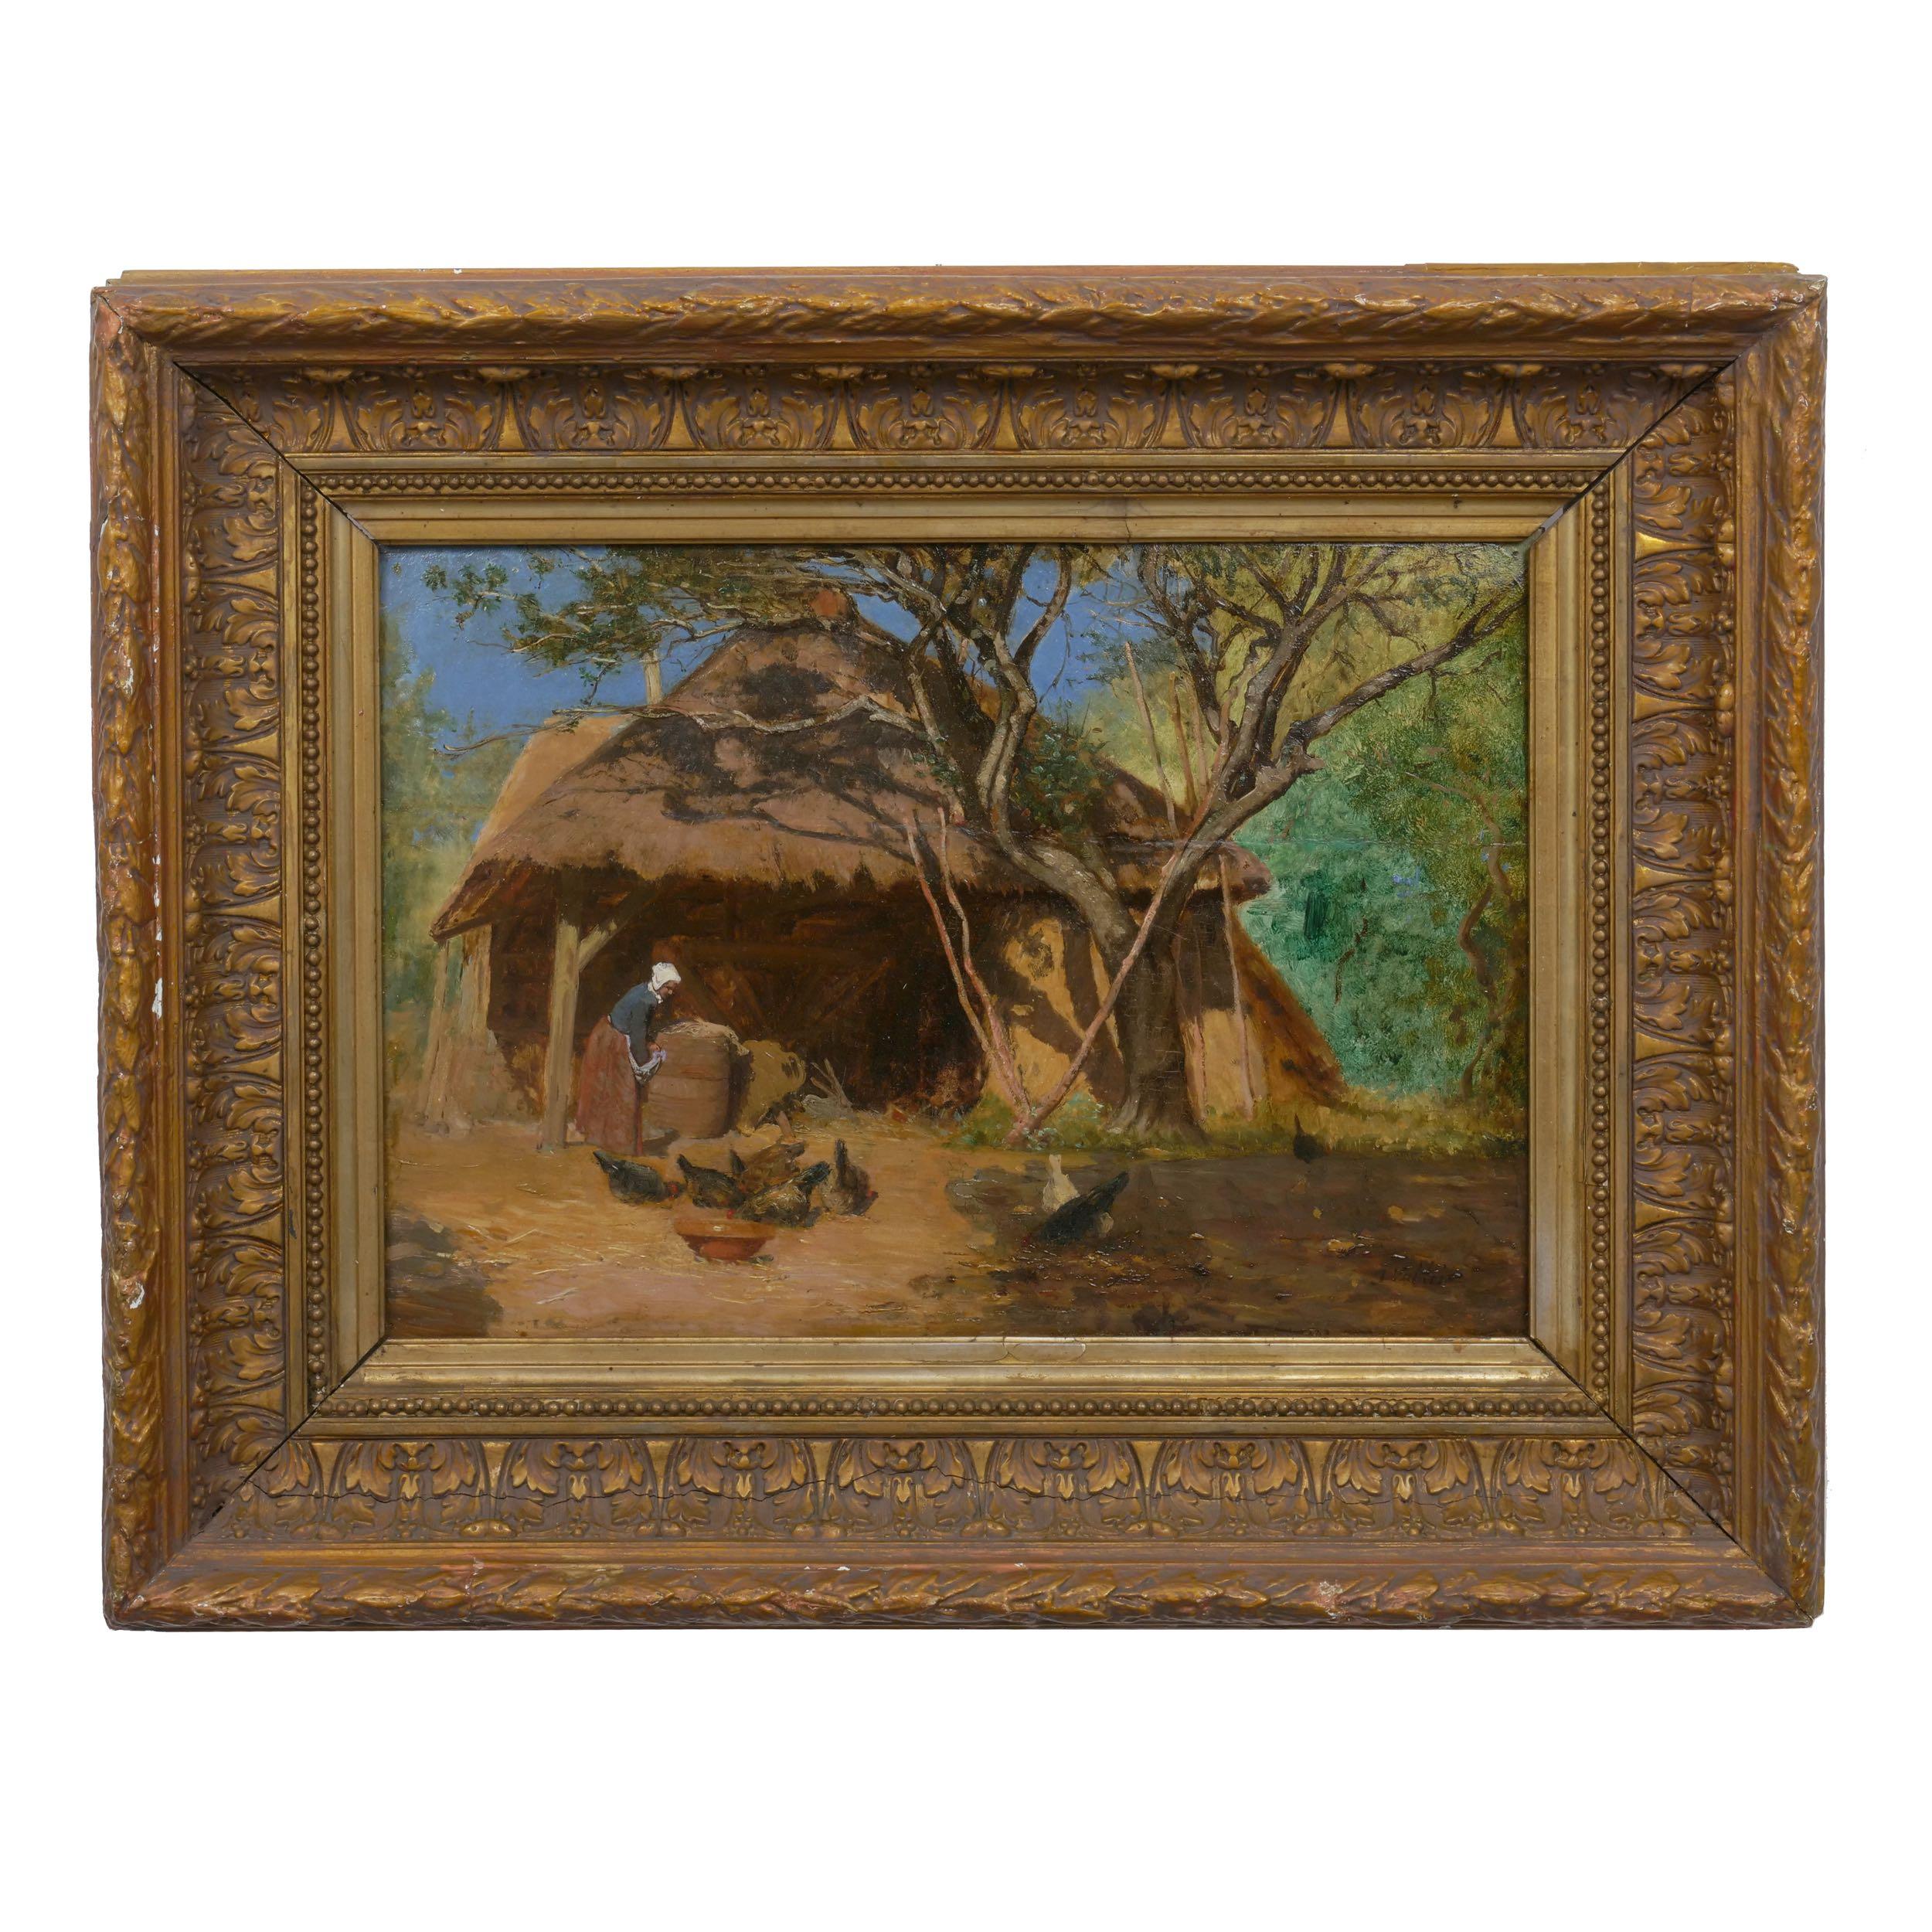 A very handsome and cheery rural scene depicting a peasant woman feeding the chickens in the yard outside of the barn. Beautifully detailed, the scene offers a glimpse of countryside living during the late 19th century that is romantic without